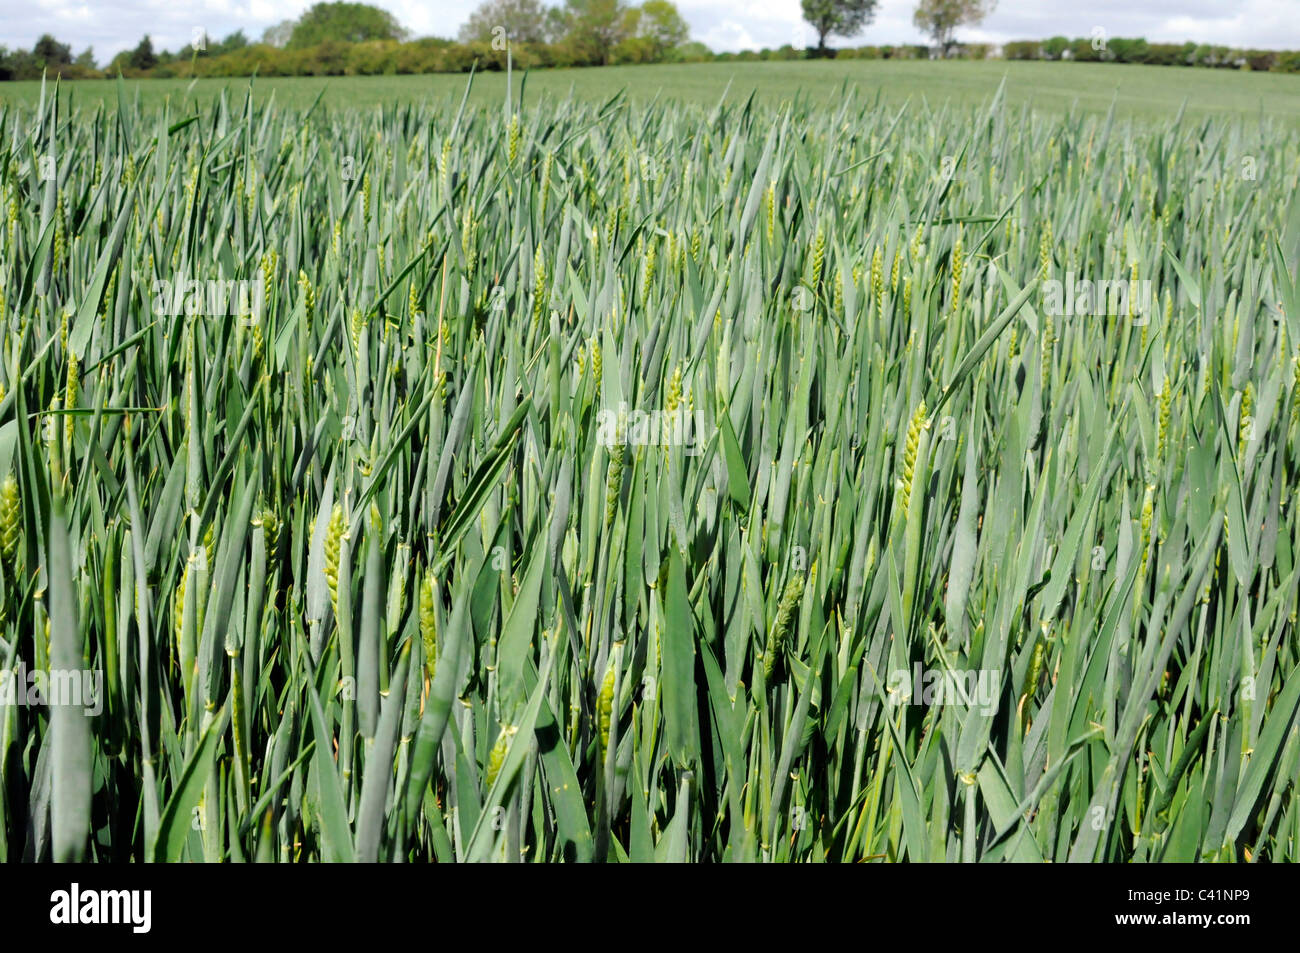 Agricultural Crops in a Field Stock Photo